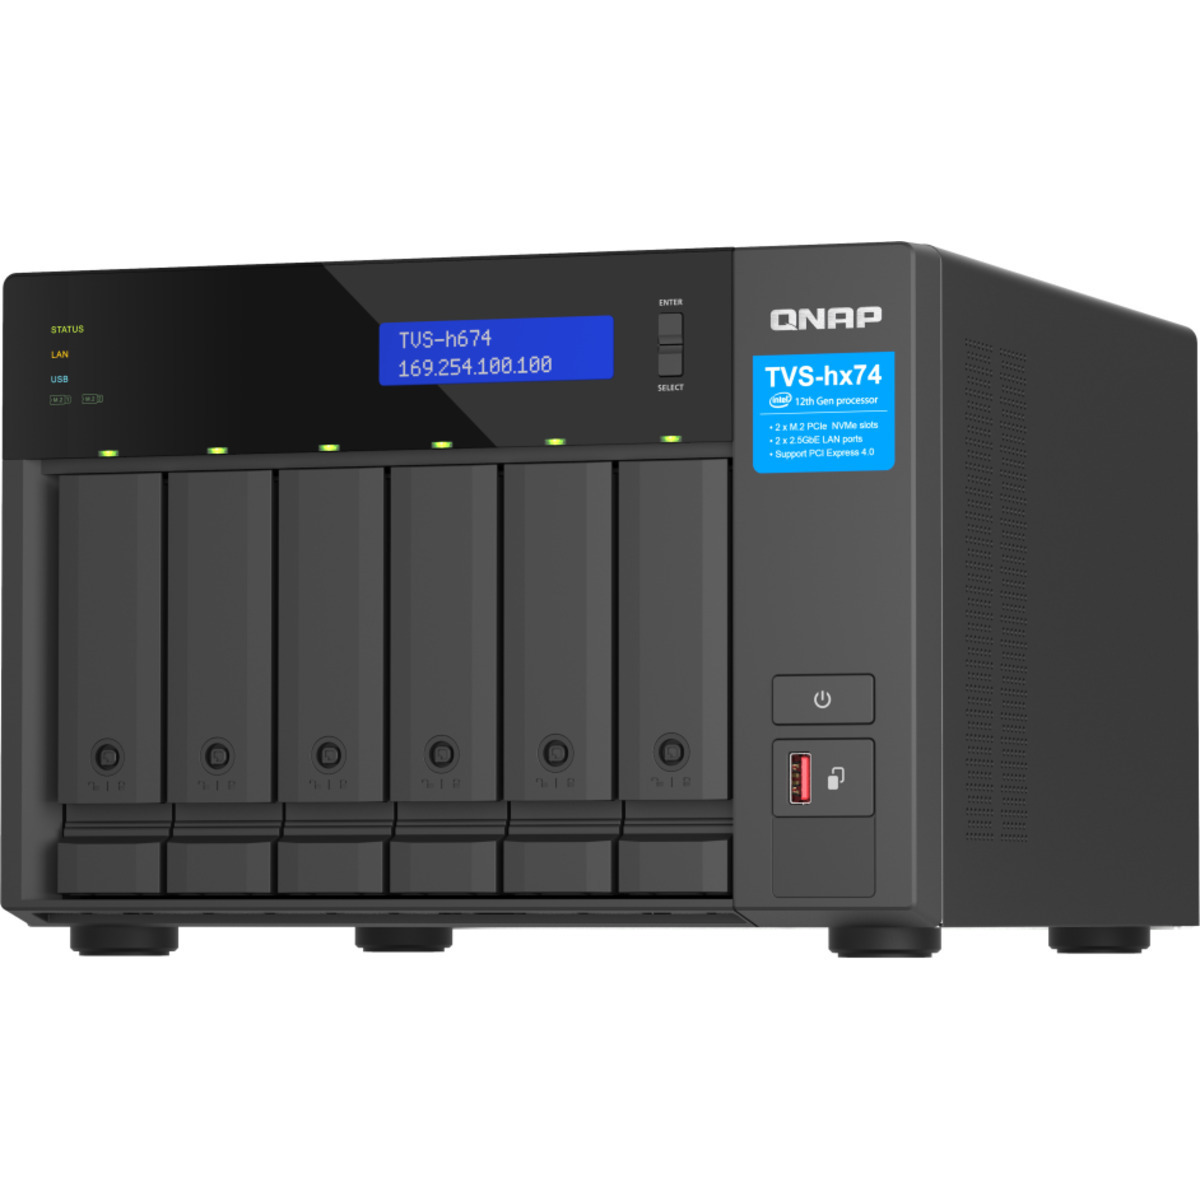 buy $3820 QNAP TVS-h674 Core i5 12tb Desktop NAS - Network Attached Storage Device 6x2000gb Western Digital Red SA500 WDS200T1R0A 2.5 560/530MB/s SATA 6Gb/s SSD NAS Class Drives Installed - Burn-In Tested - nas headquarters buy network attached storage server device das new raid-5 free shipping usa TVS-h674 Core i5